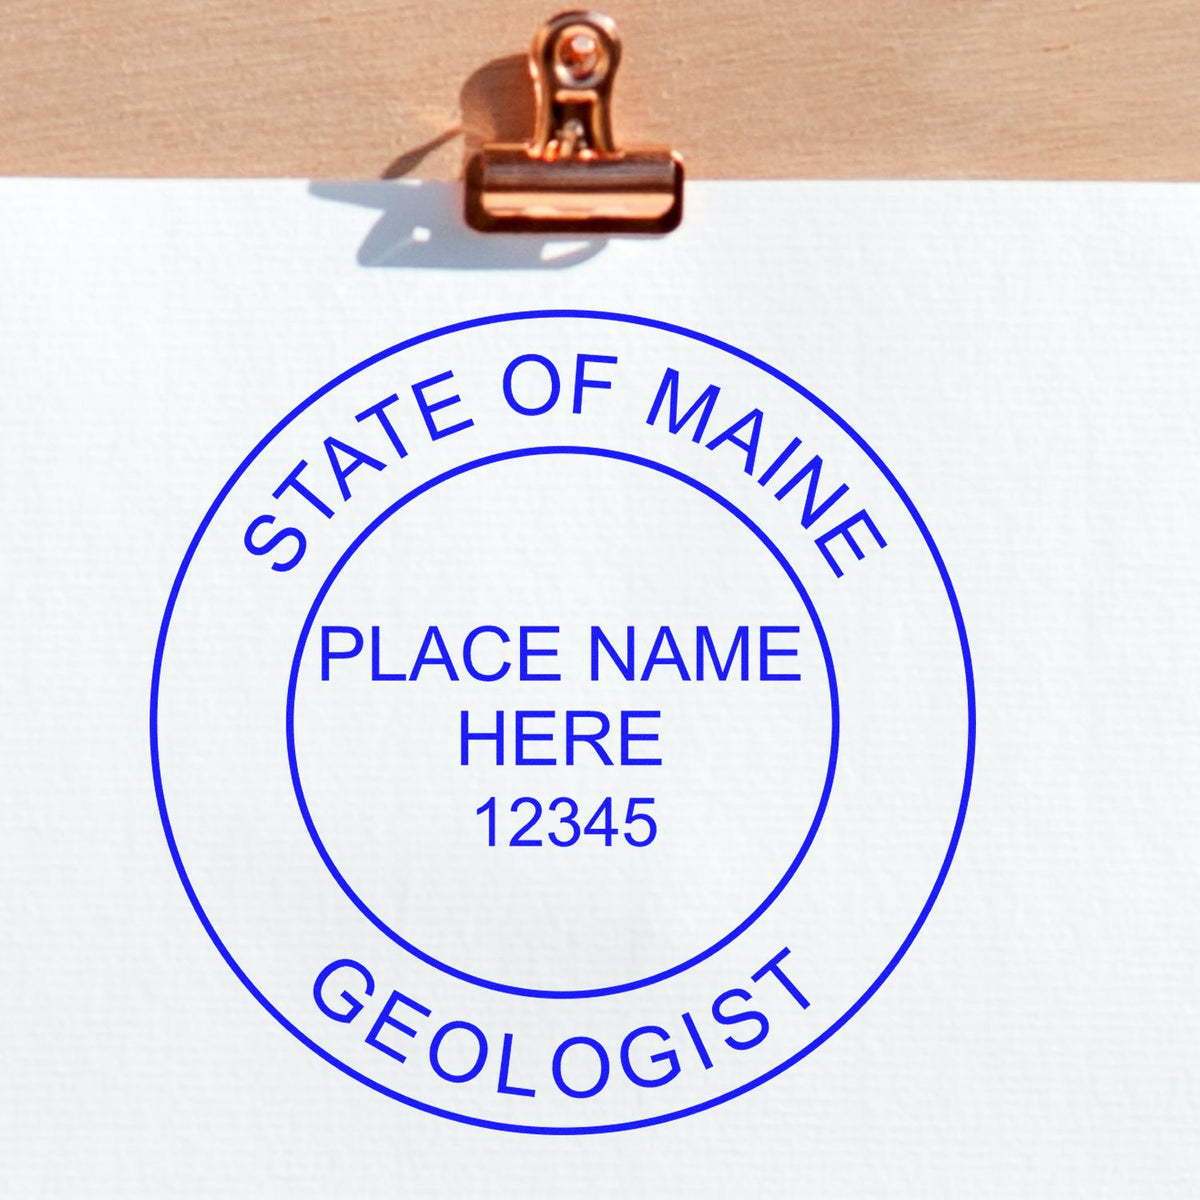 An alternative view of the Digital Maine Geologist Stamp, Electronic Seal for Maine Geologist stamped on a sheet of paper showing the image in use